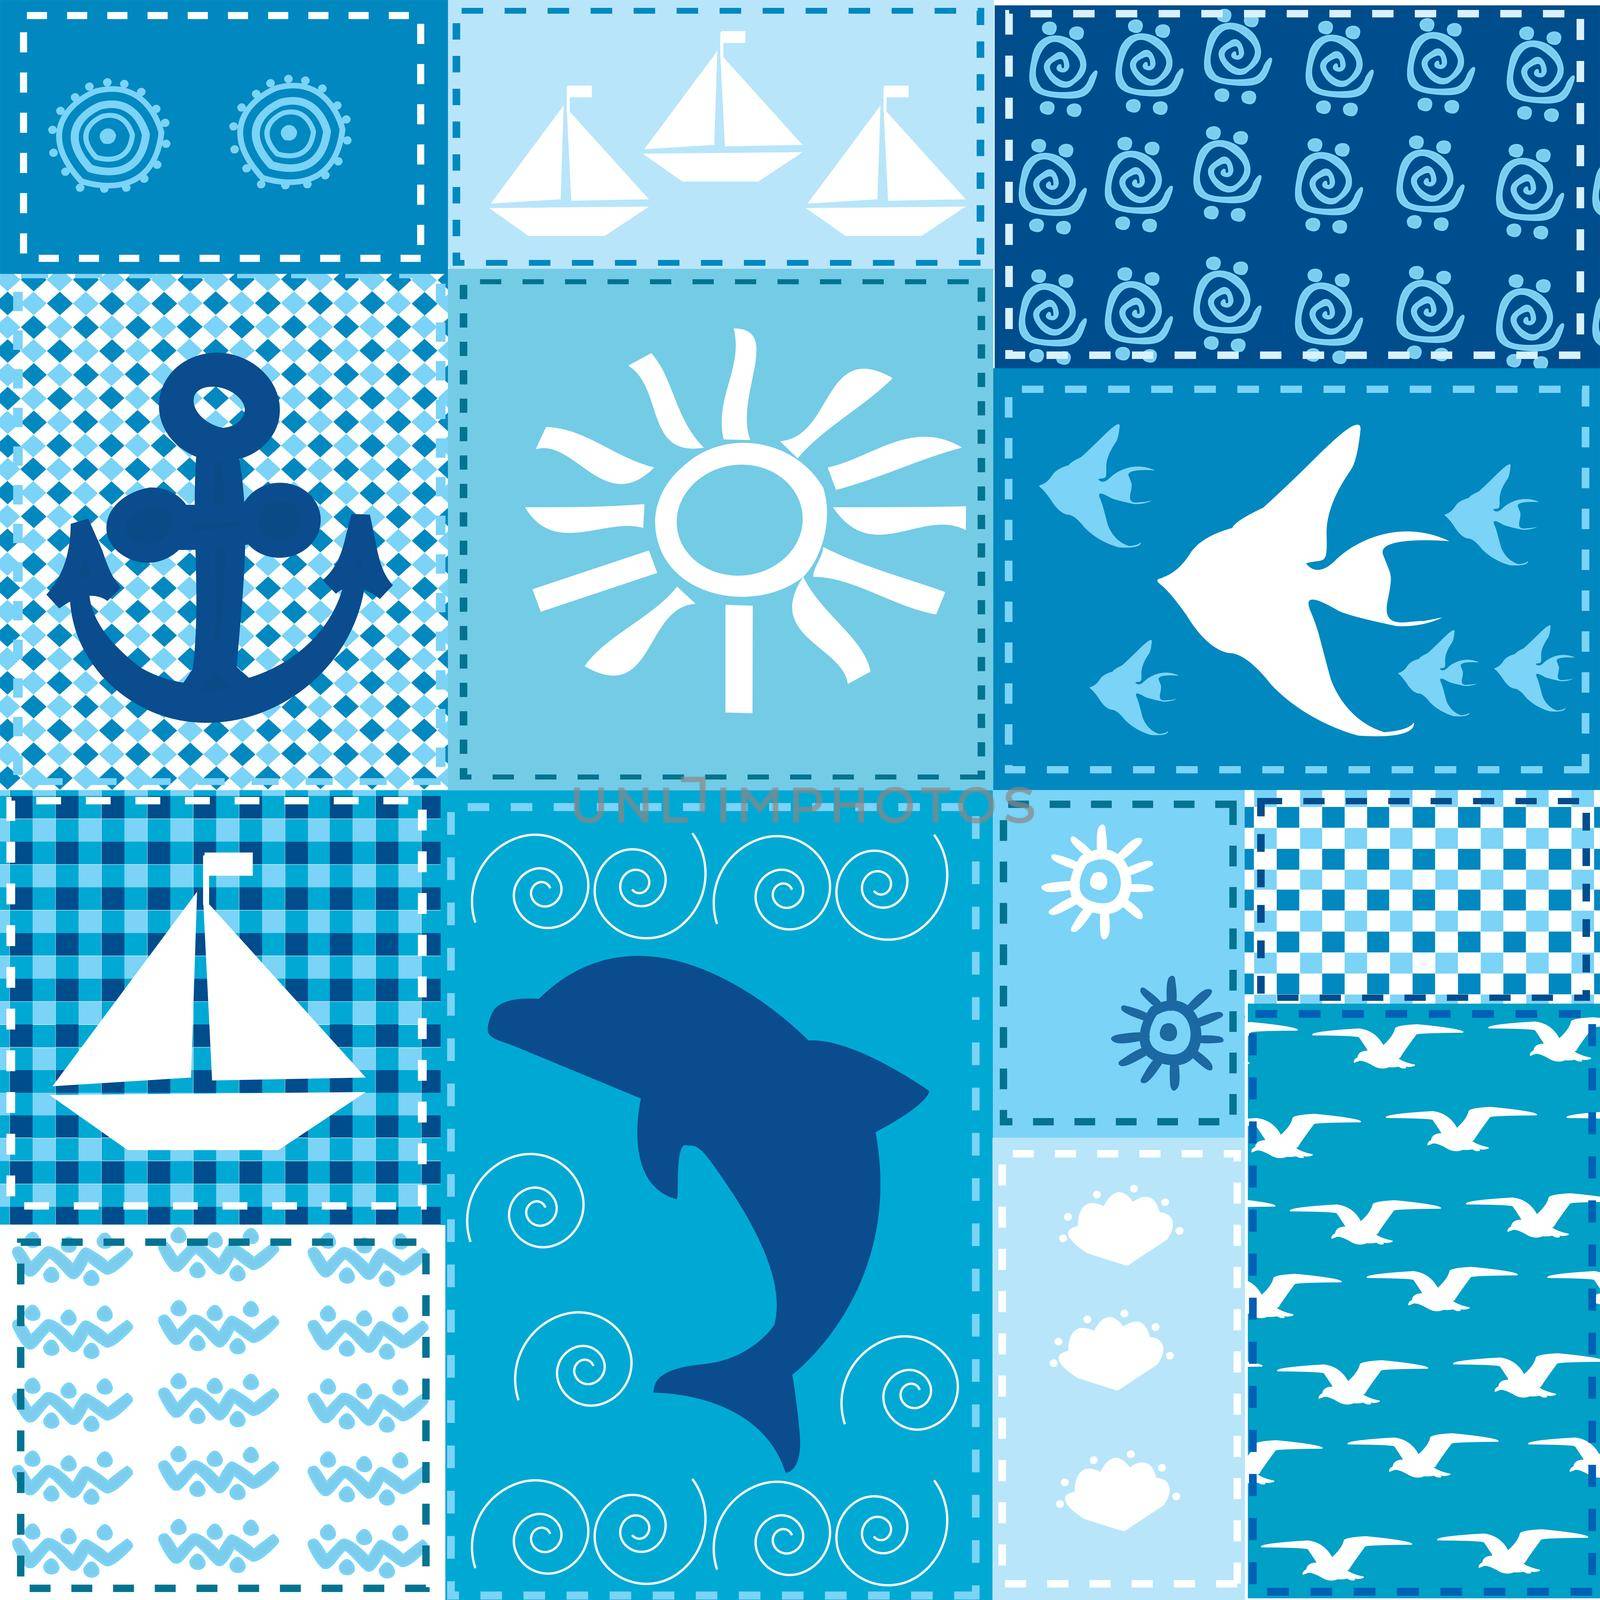 Marine patchwork with blue elements by hibrida13